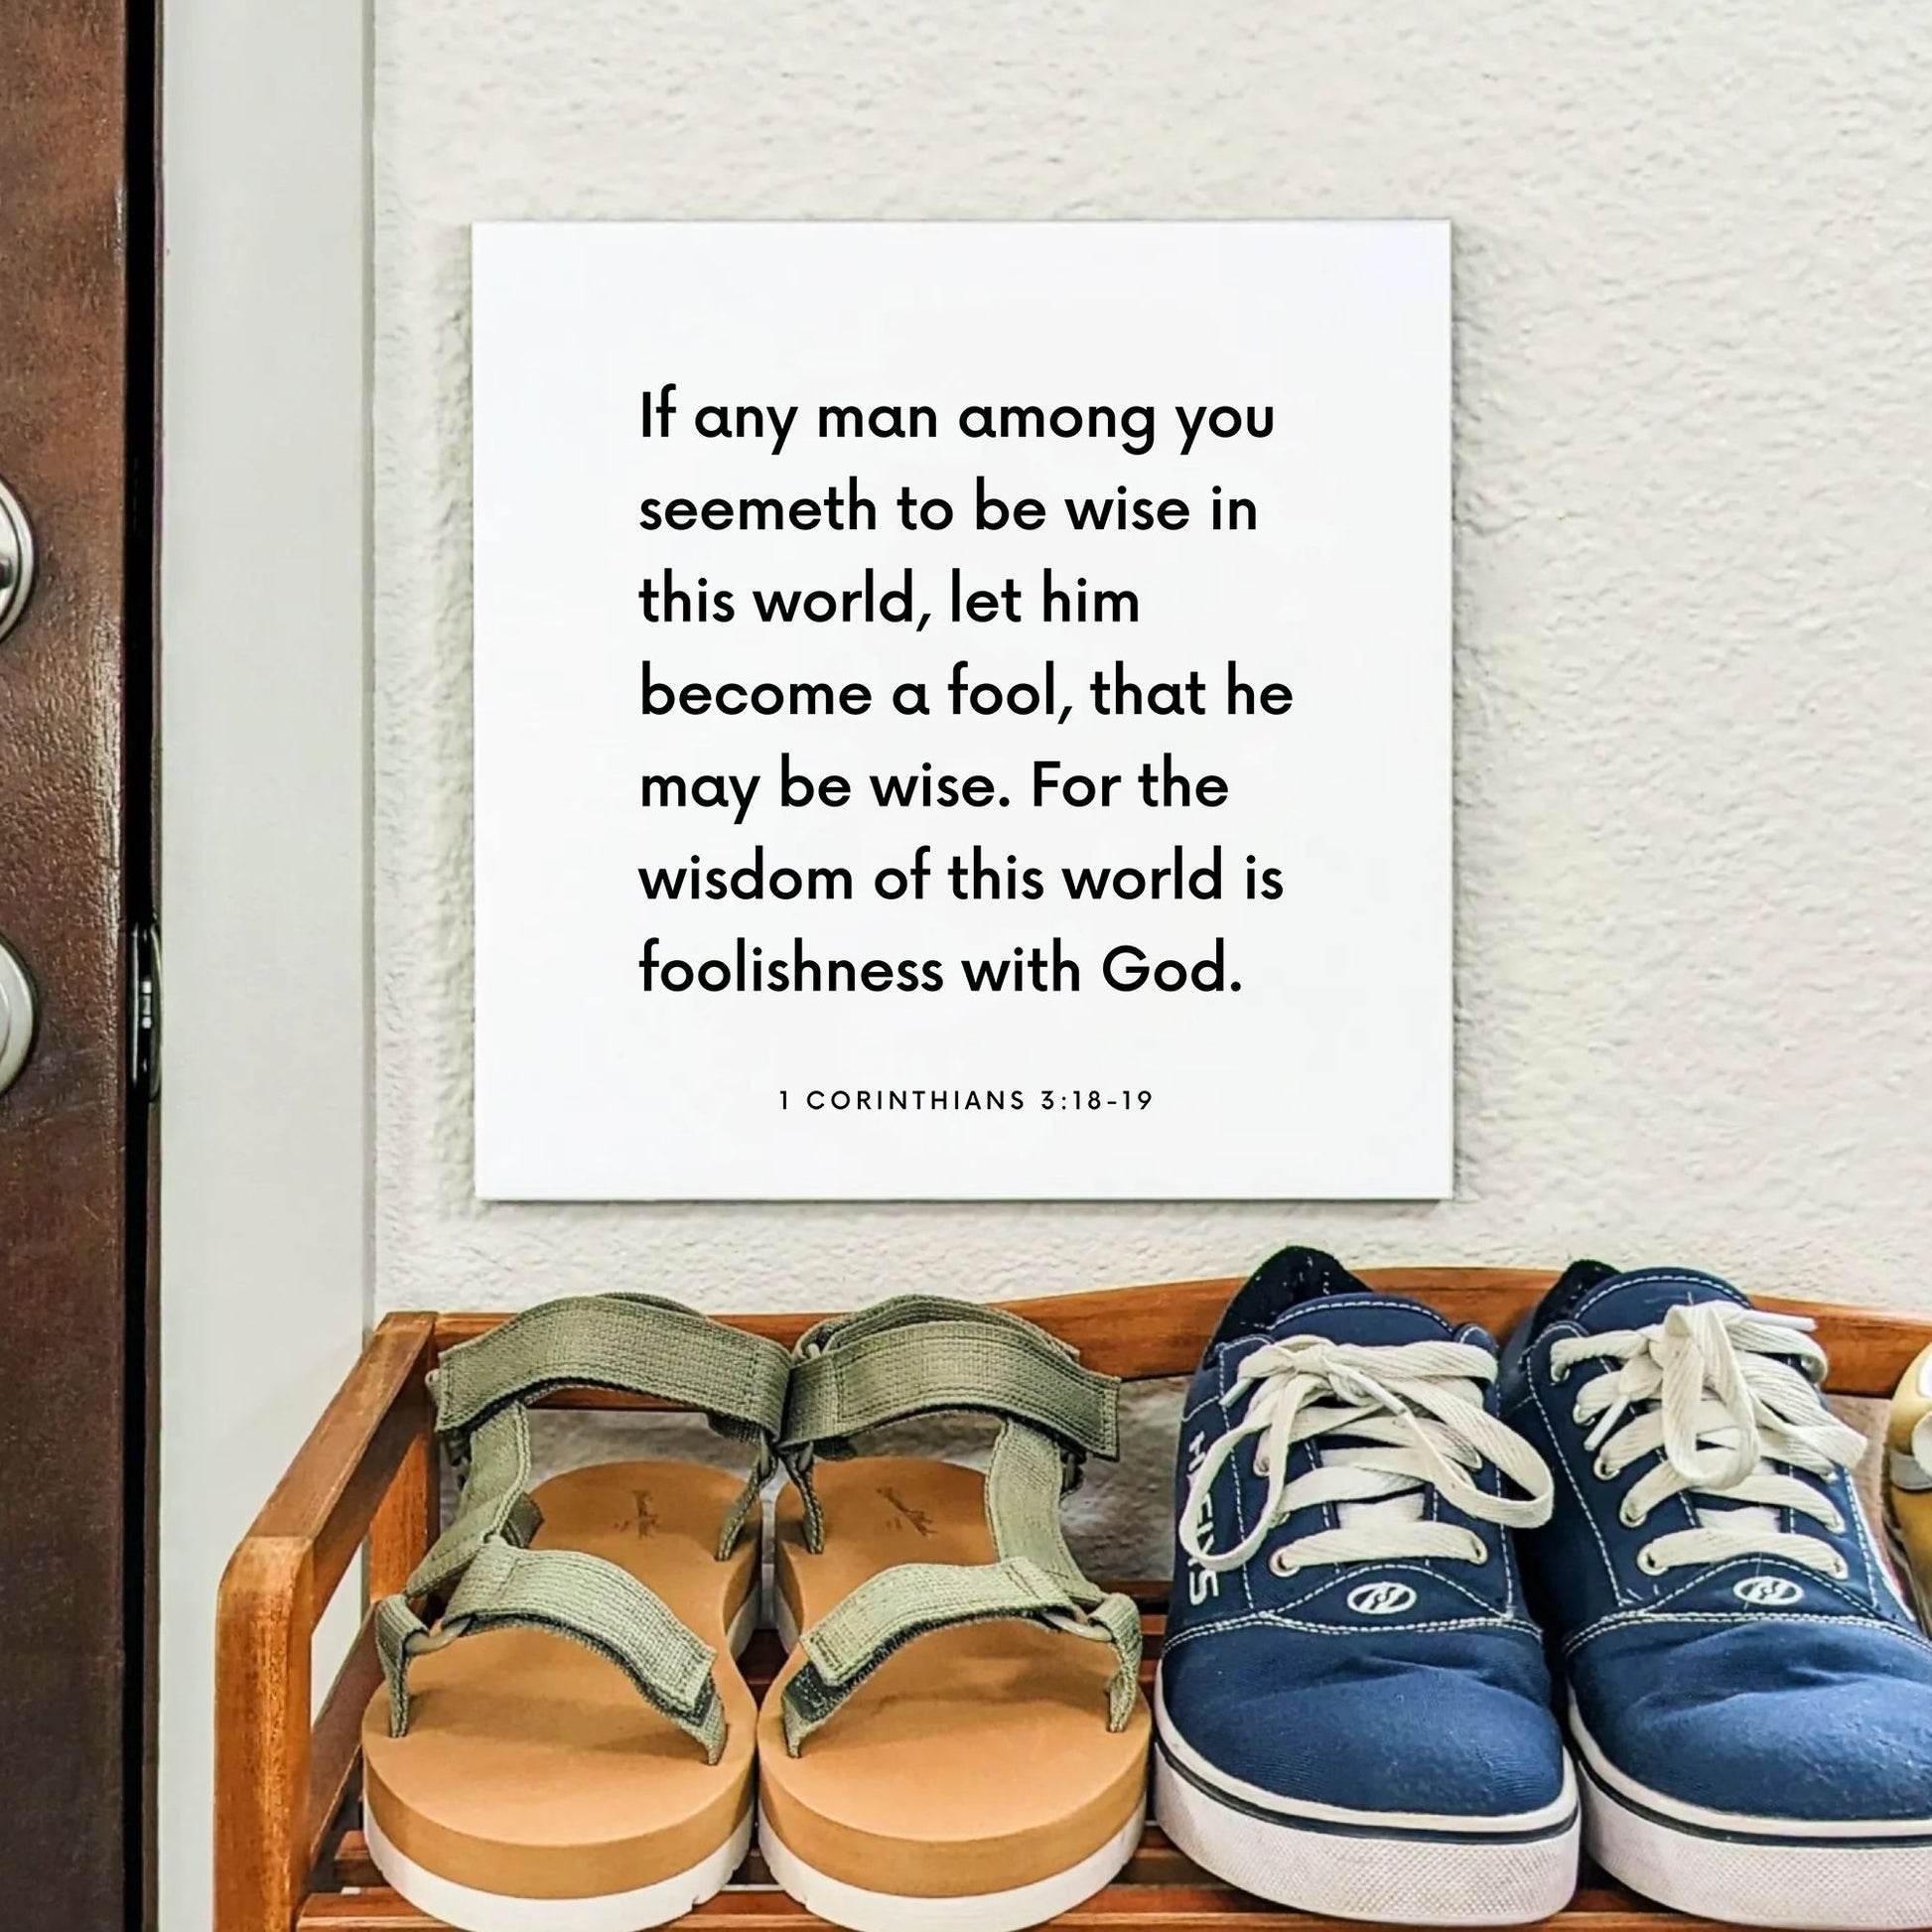 Shoes mouting of the scripture tile for 1 Corinthians 3:18-19 - "The wisdom of this world is foolishness with God"